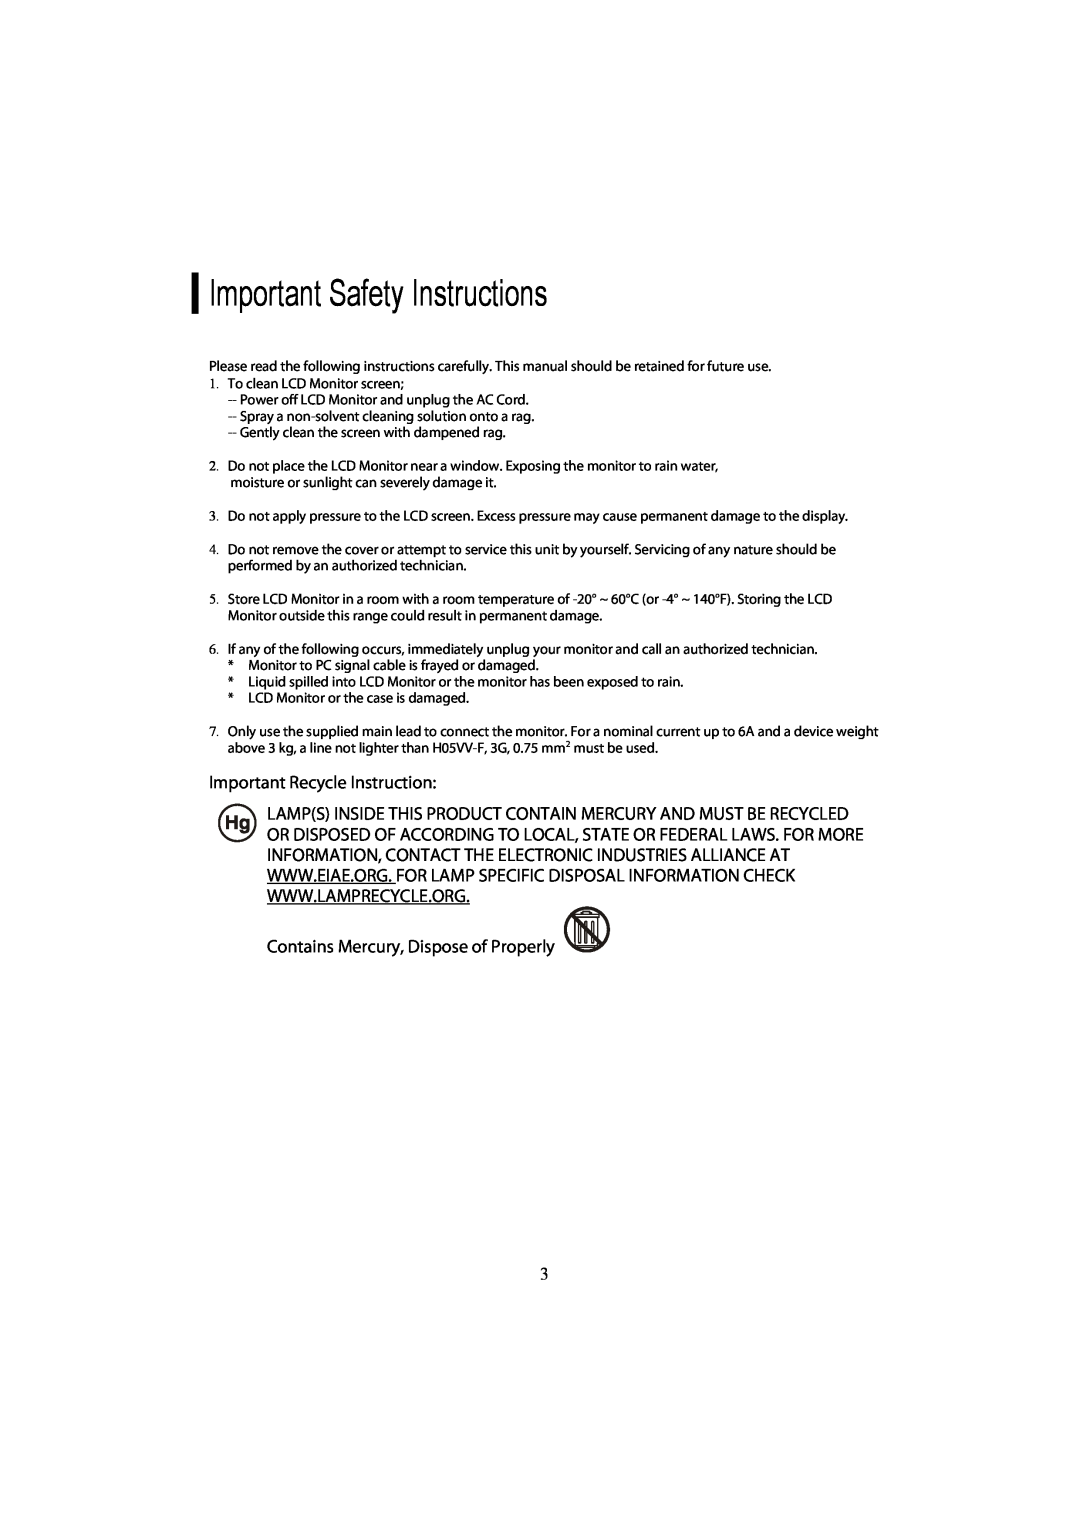 Planar PL2010MW manual Important Safety Instructions, Important Recycle Instruction, Contains Mercury, Dispose of Properly 